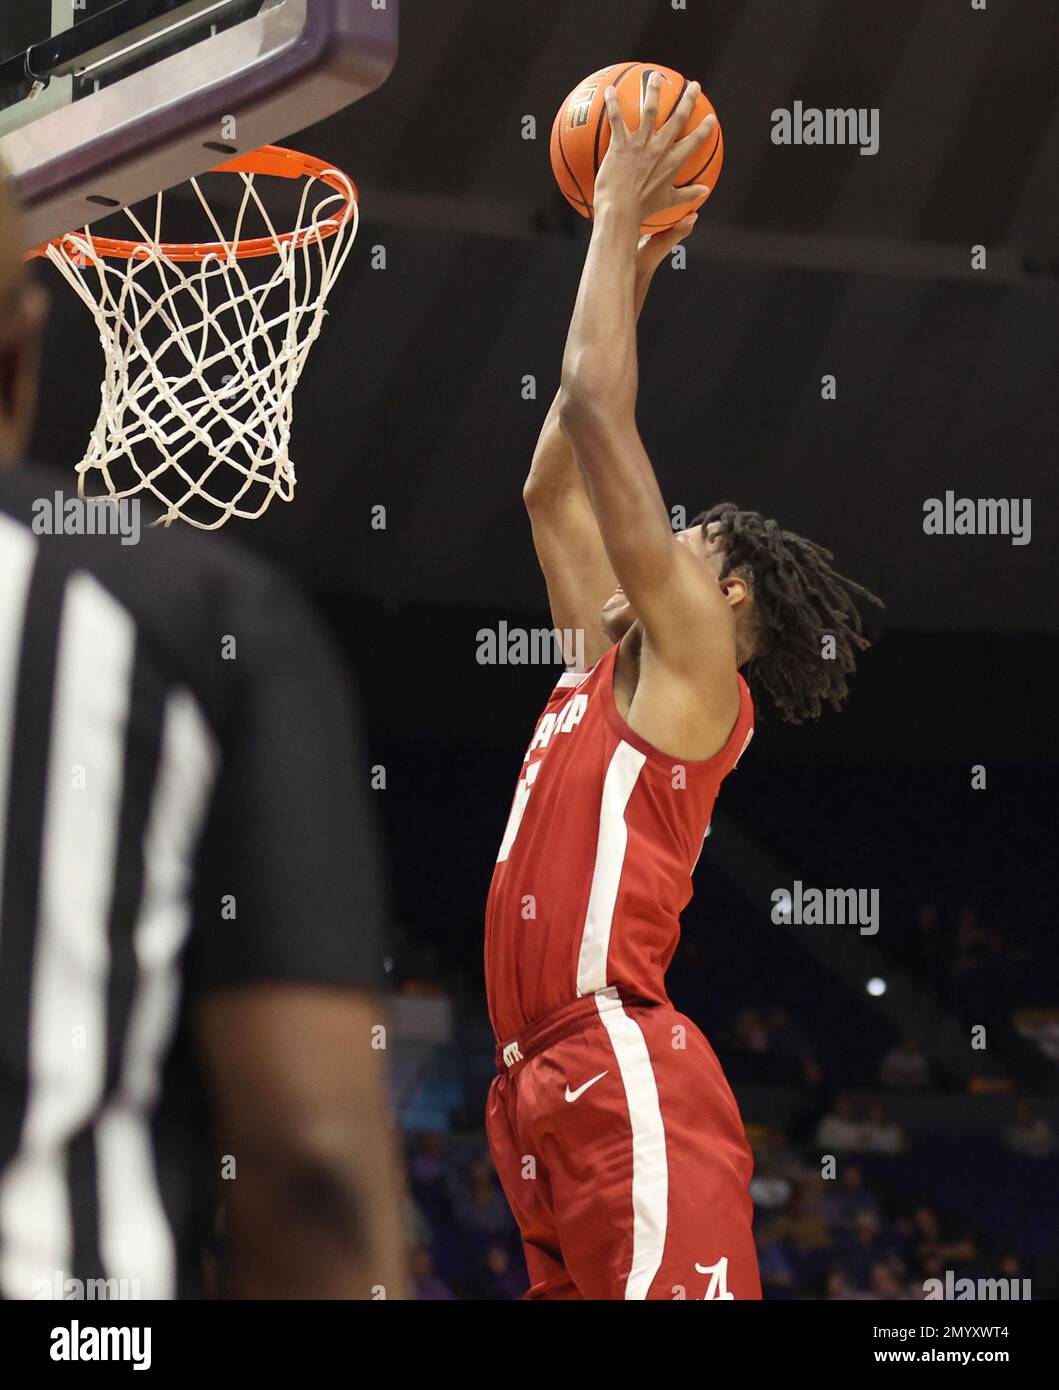 Baton Rouge, USA. 04th Feb, 2023. Alabama Crimson Tide forward Noah Clowney (15) throws down a dunk during a men's college basketball game at the Pete Maravich Assembly Center in Baton Rouge, Louisiana on Saturday, February 4, 2023. (Photo by Peter G. Forest/Sipa USA) Credit: Sipa USA/Alamy Live News Stock Photo